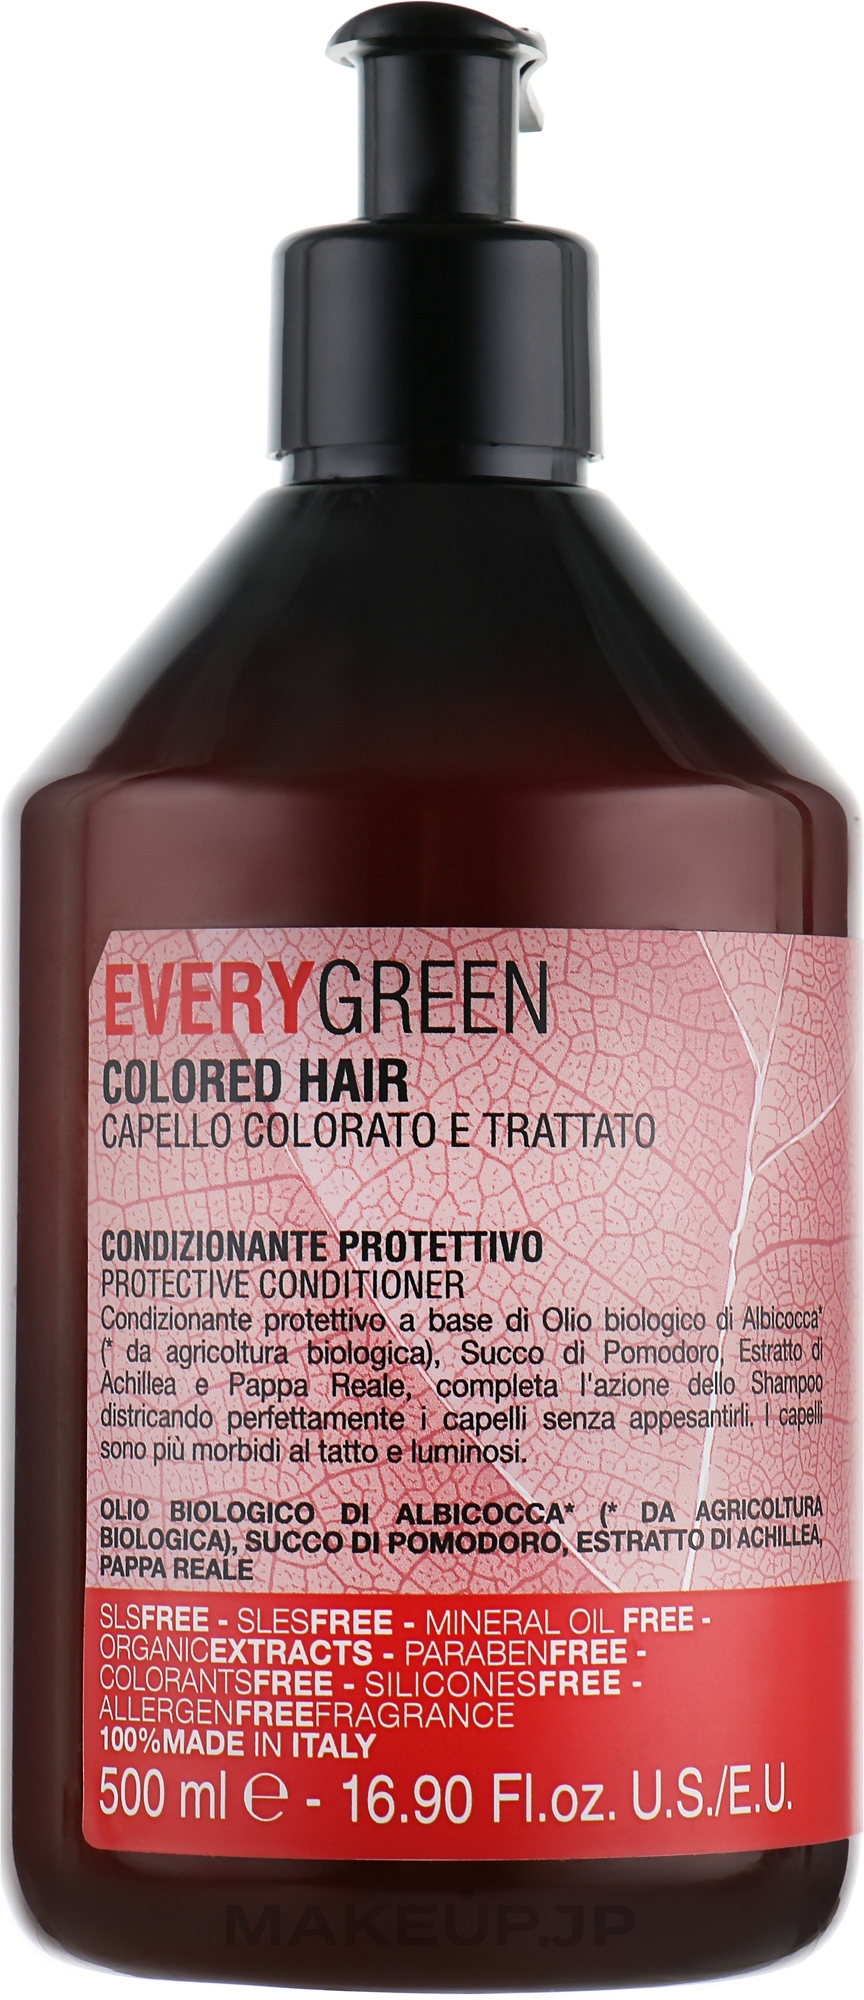 Color-Treated Hair Conditioner - EveryGreen Colored Hair Restorative Conditioner — photo 500 ml